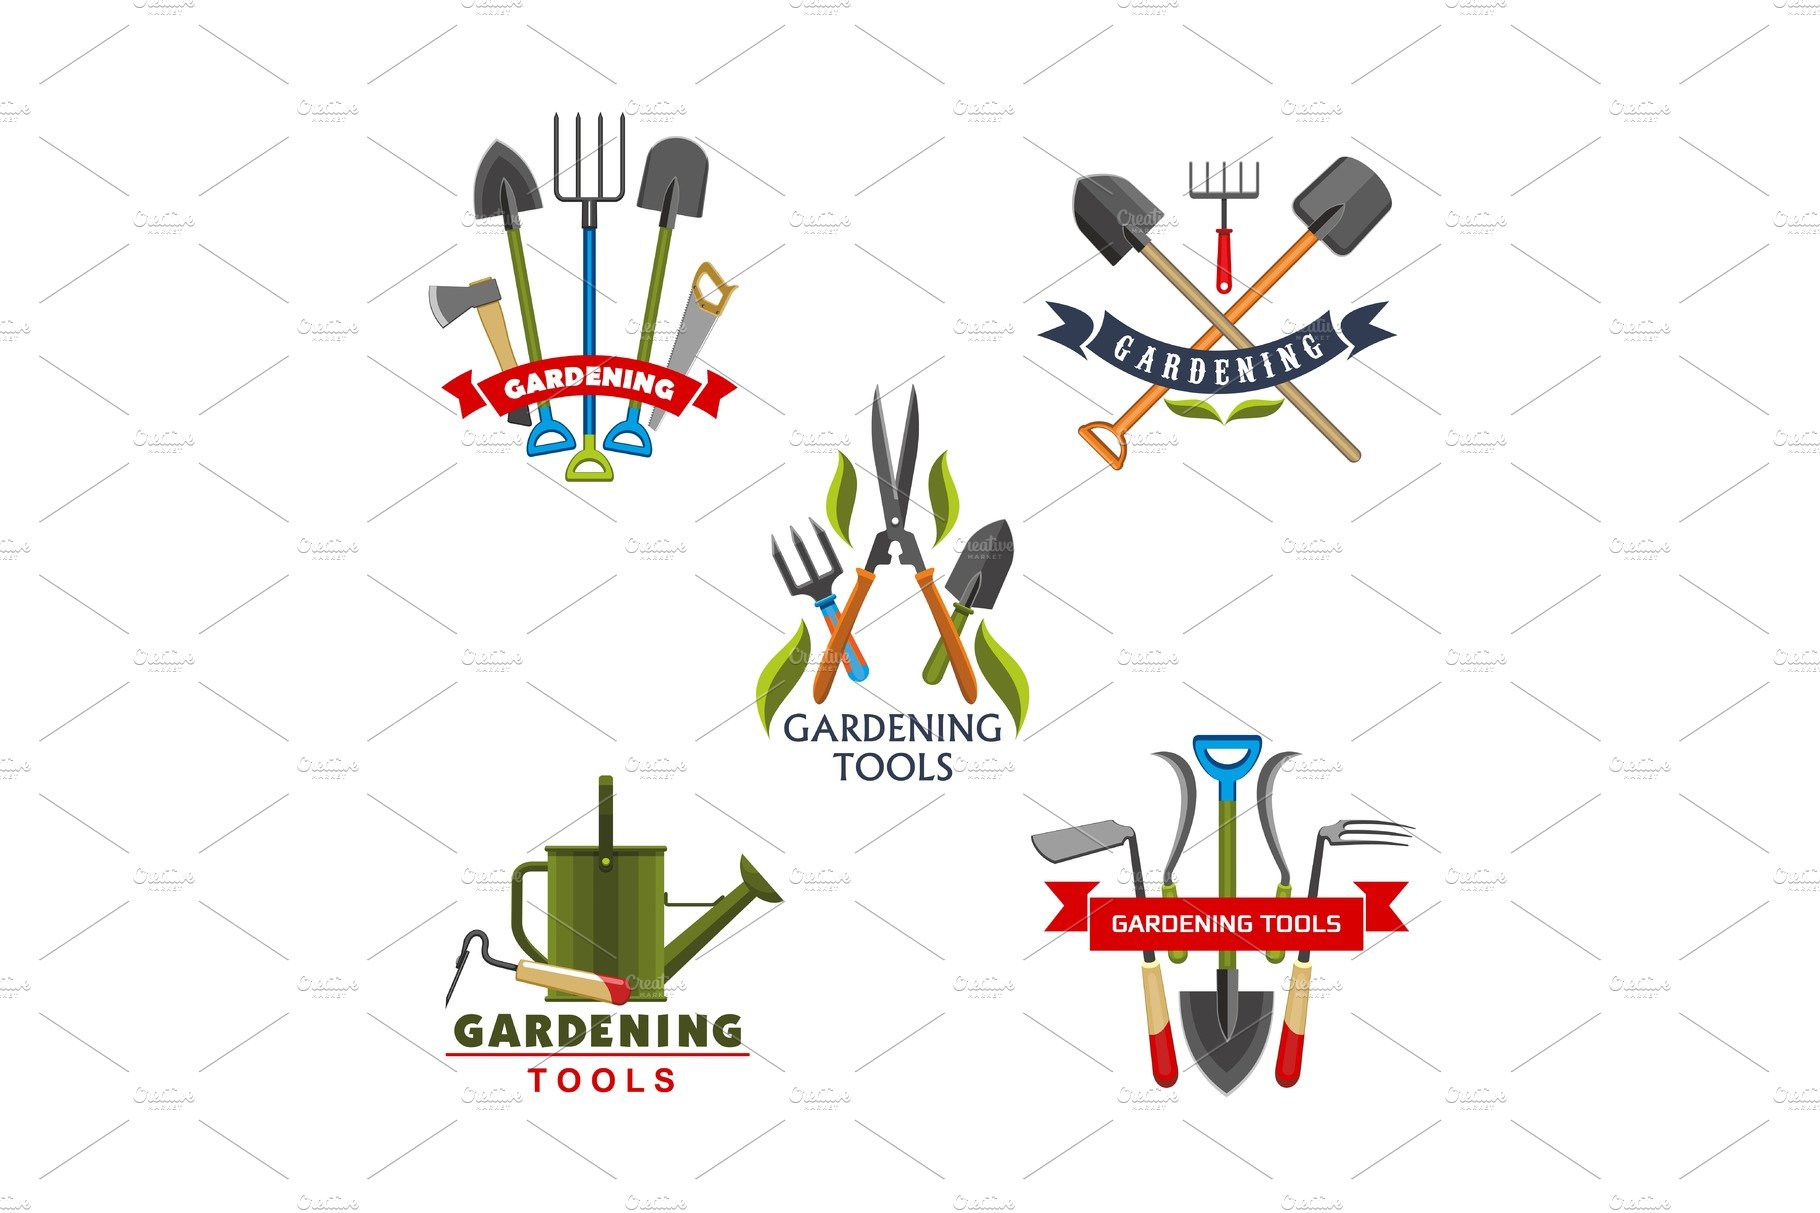 Work tool and equipment icons for gardening design cover image.